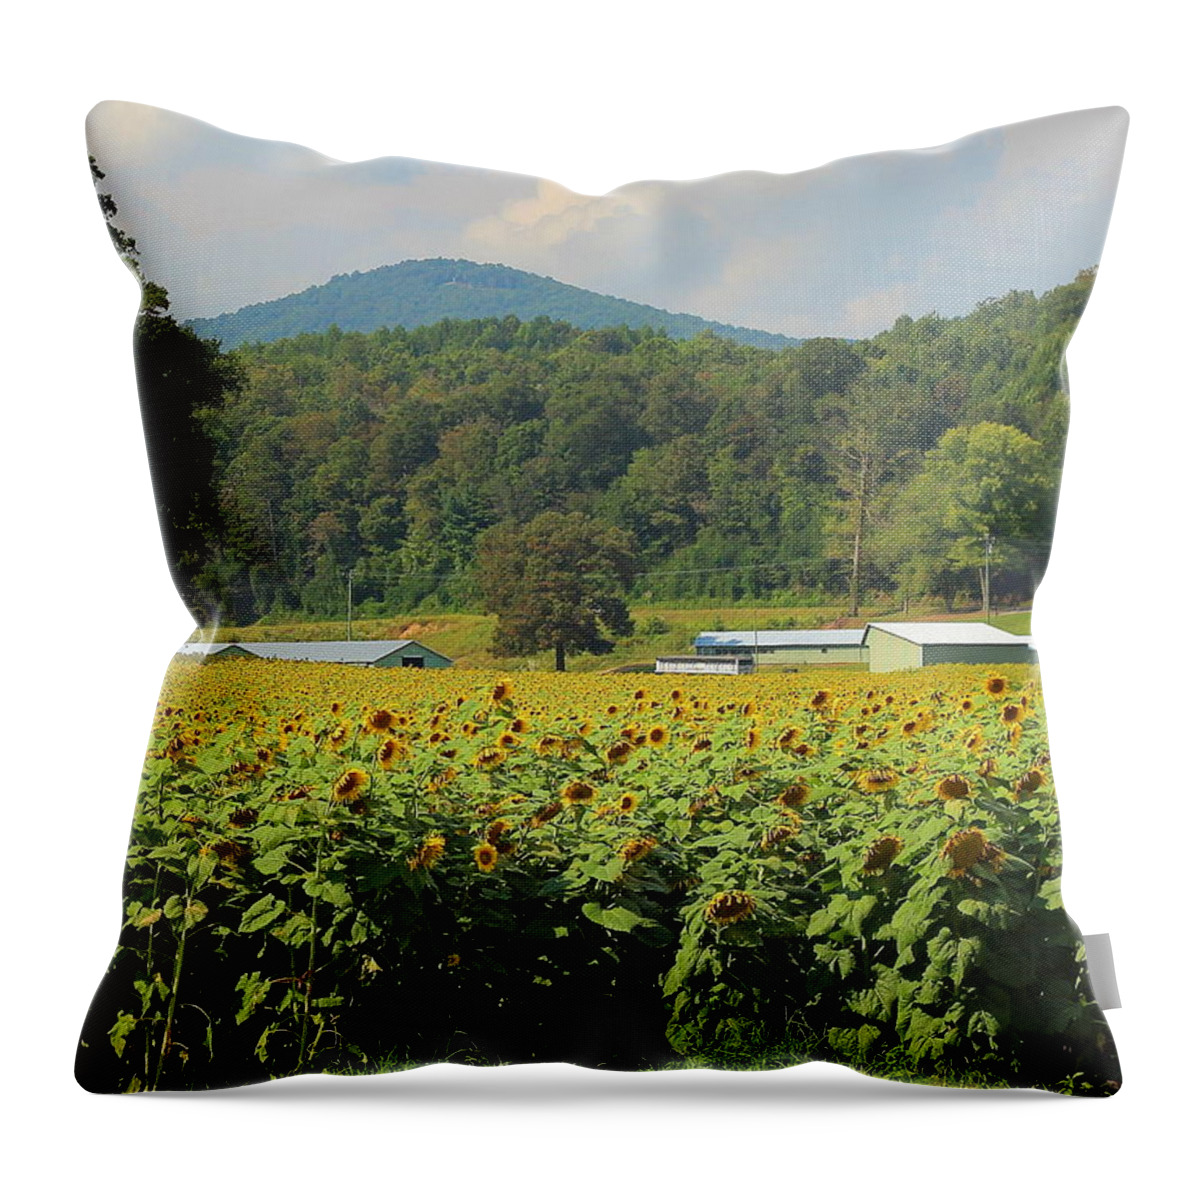 Sunflower Throw Pillow featuring the photograph Sunflowers And Mountain View 2 by Cathy Lindsey